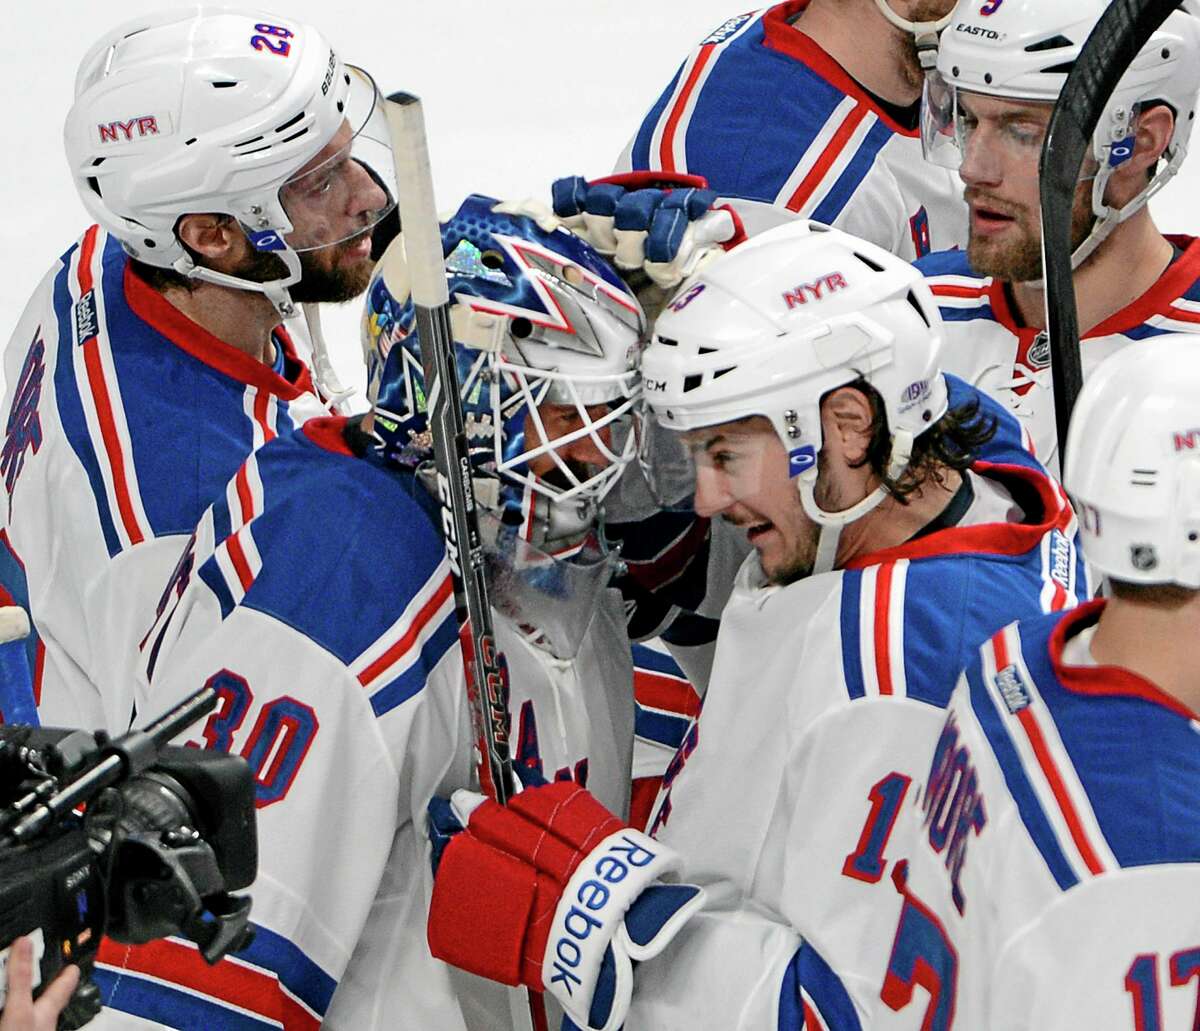 New York Rangers goalie Henrik Lundqvist is congratulated by teammates after defeating the Montreal Canadiens 3-1 in Game 2 of the Eastern Conference finals on Monday in Montreal.